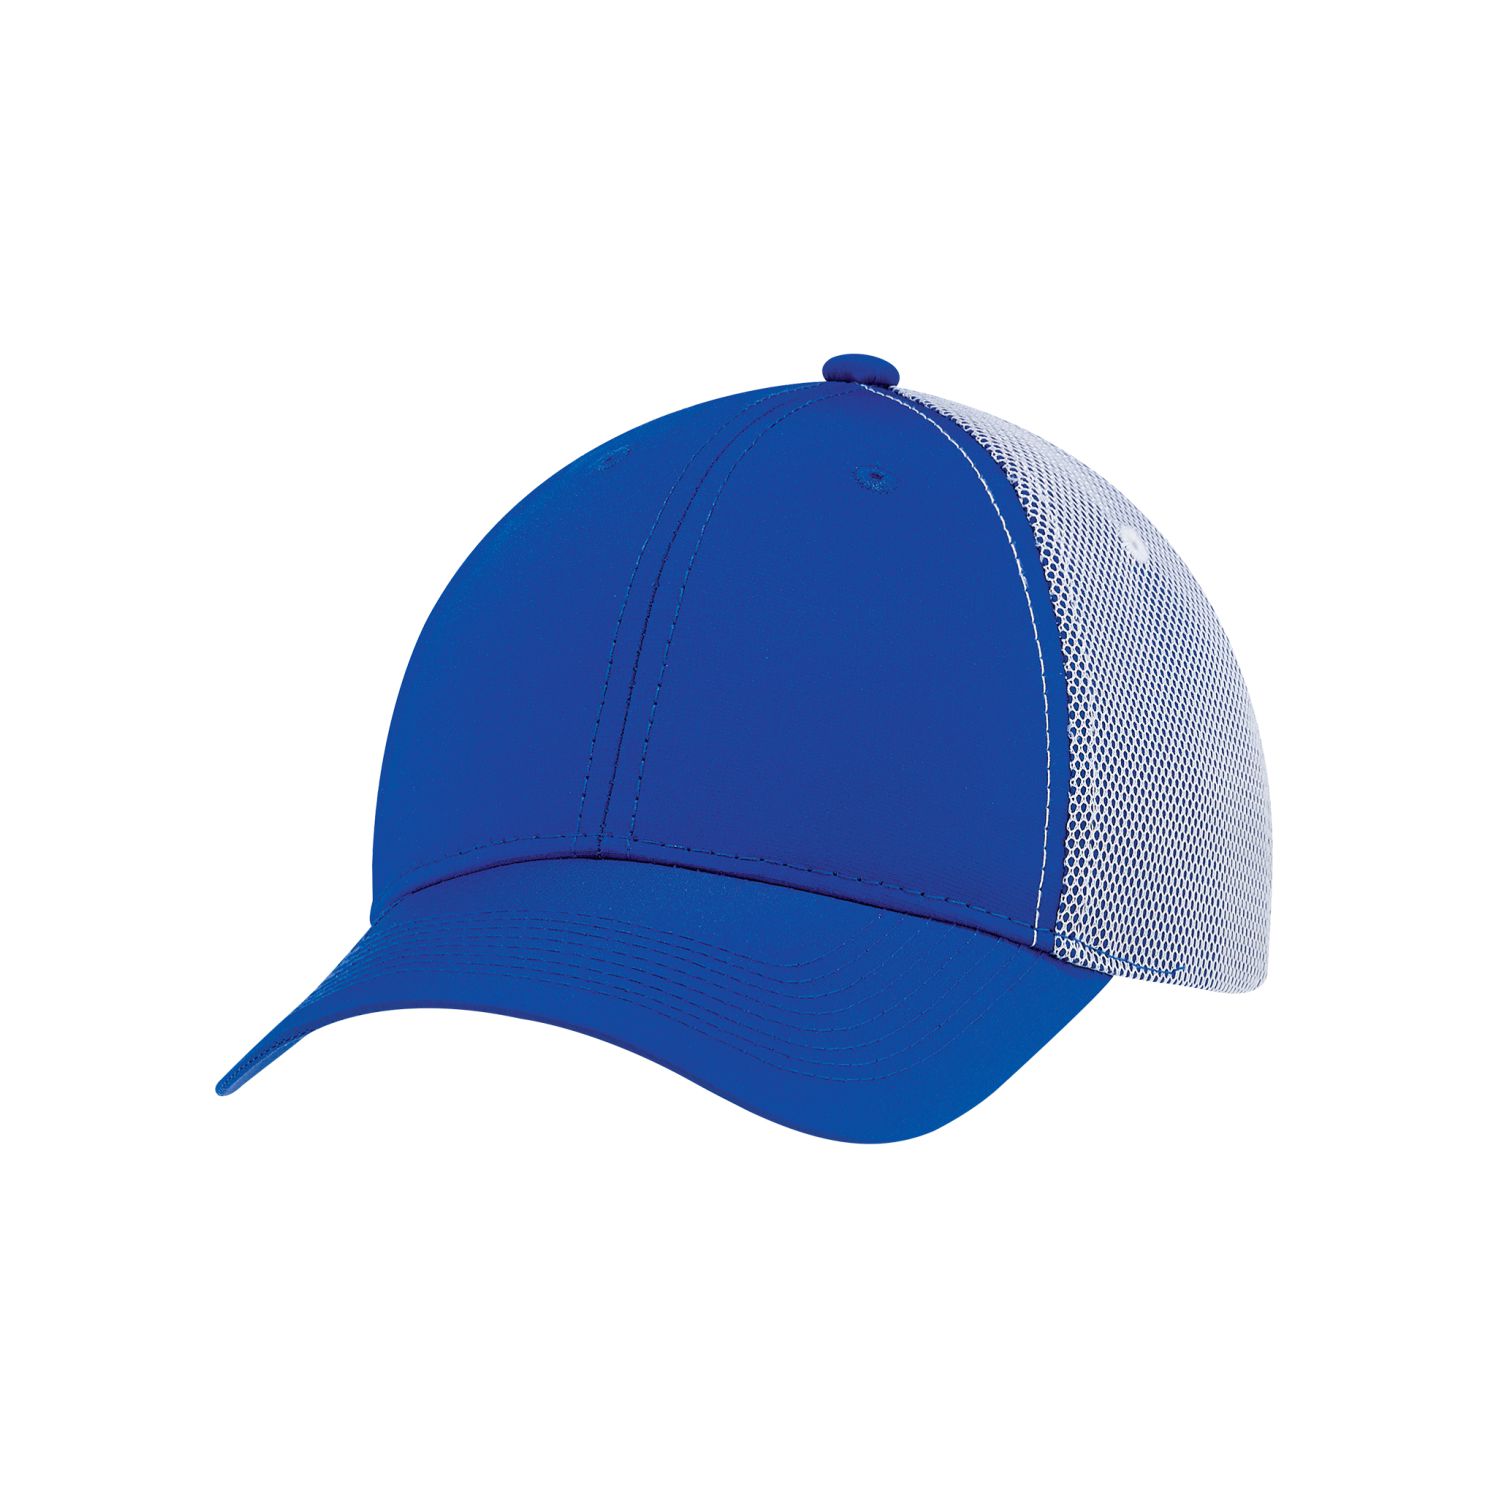 AJM Polyester Rip Stop / Polyester Rip Stop Bonded Mesh 6 Panel Constructed Full-Fit Hat #1B637M Royal Blue / White